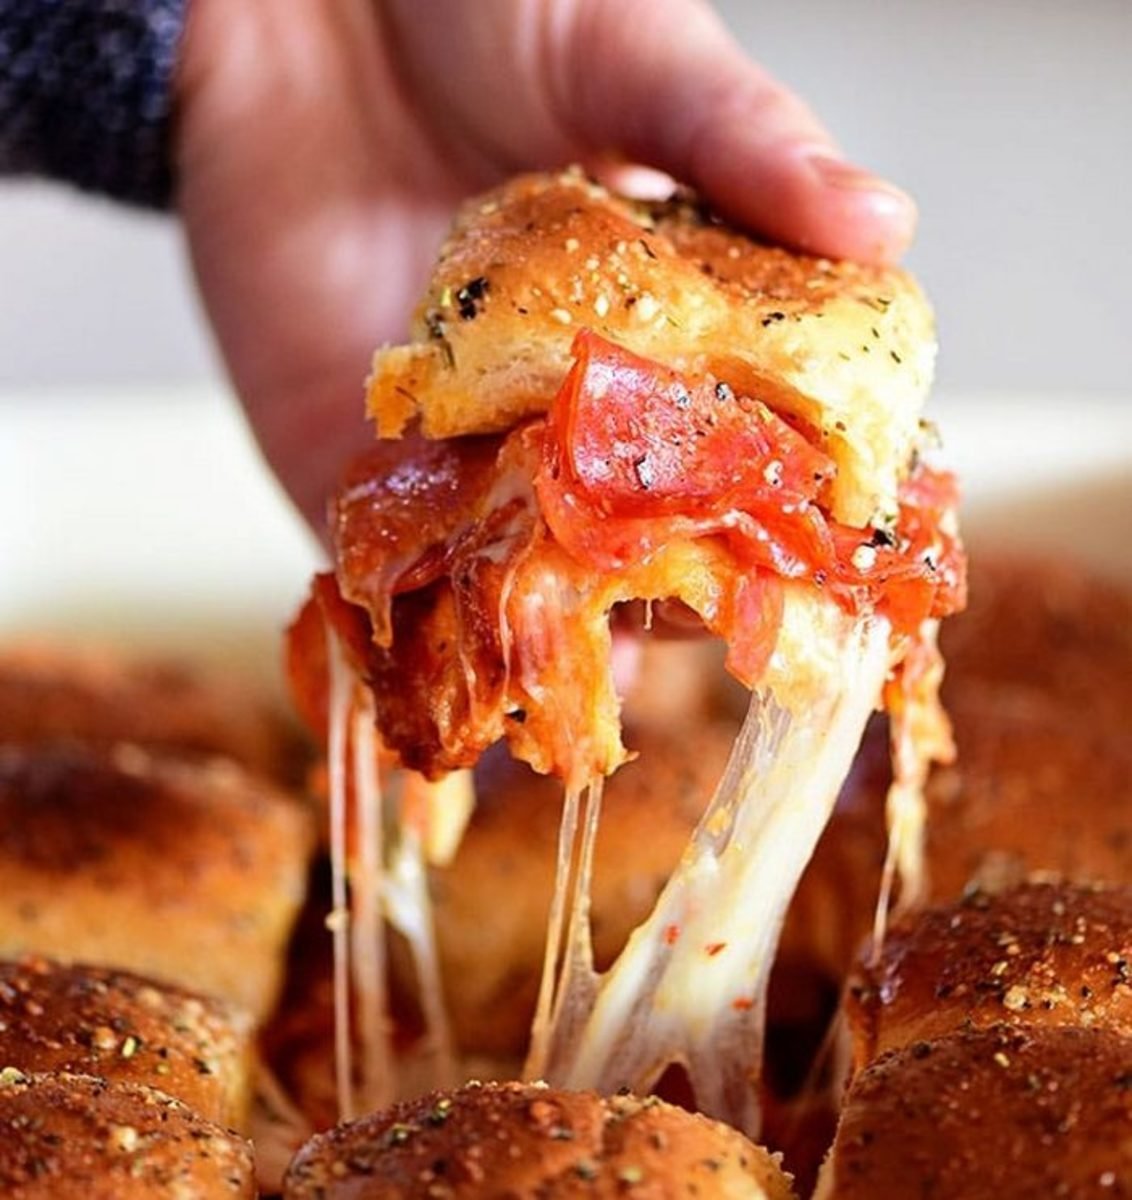 15 Essential Super Bowl Food Ideas That Will Score Big With All the Hungry Fans